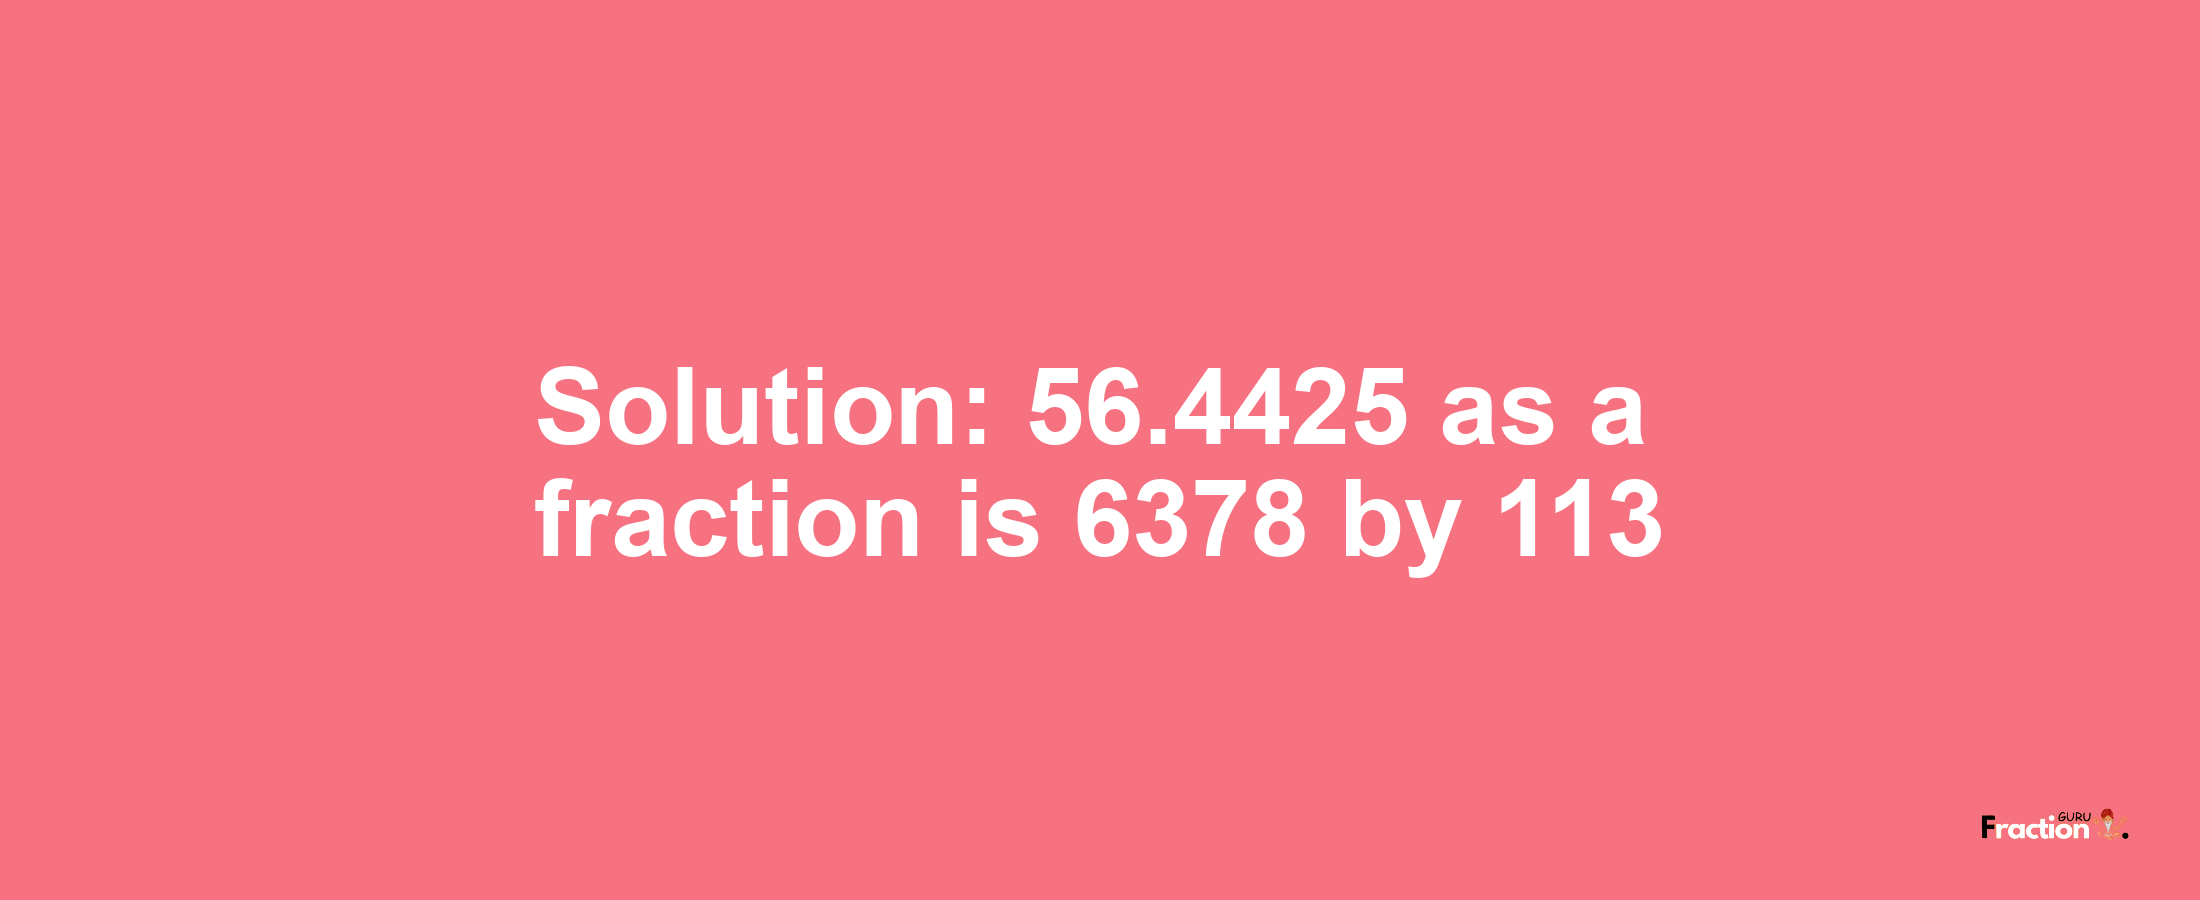 Solution:56.4425 as a fraction is 6378/113